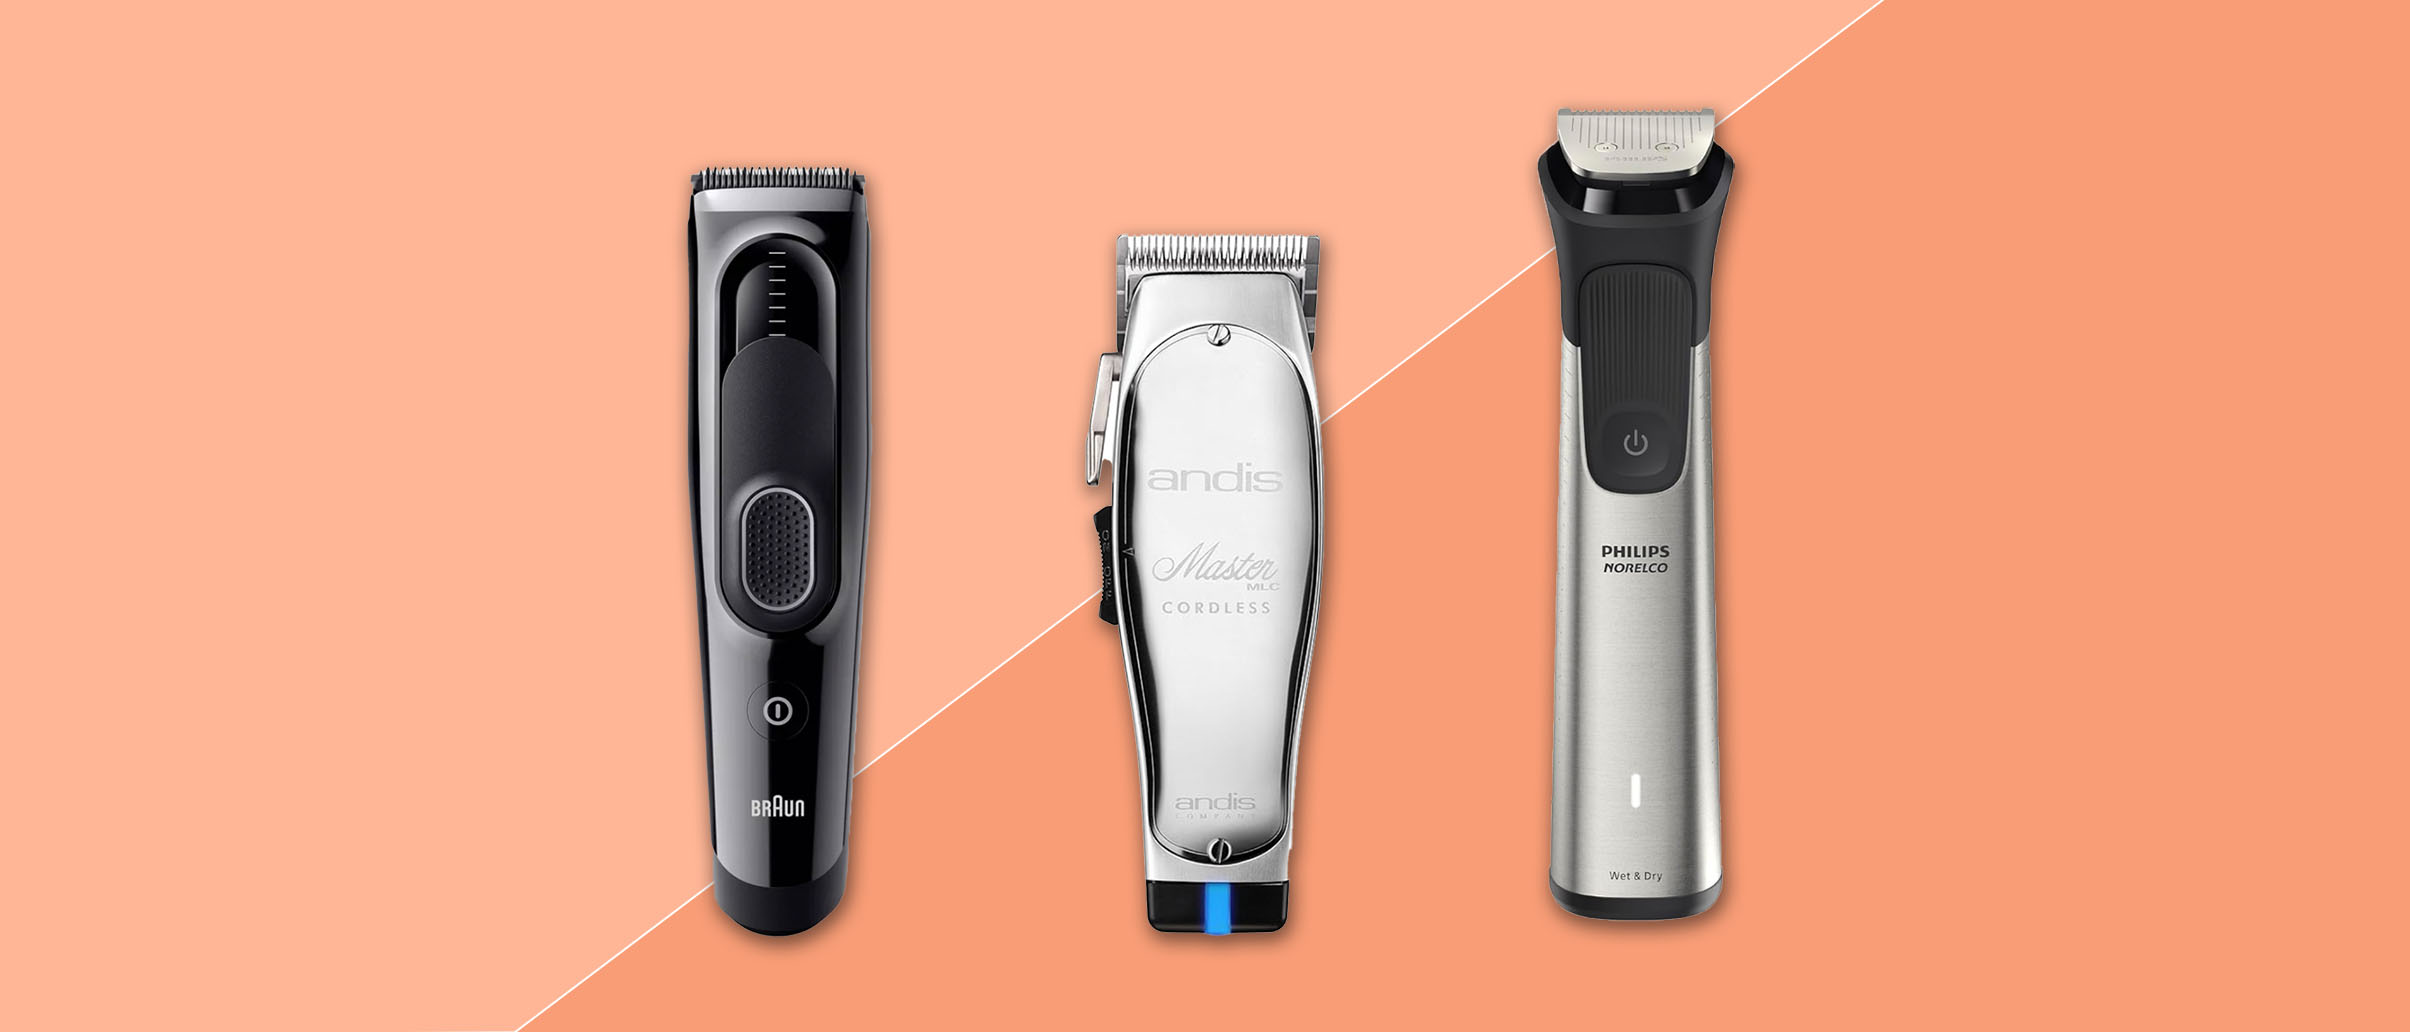 Image of three men's hair clippers